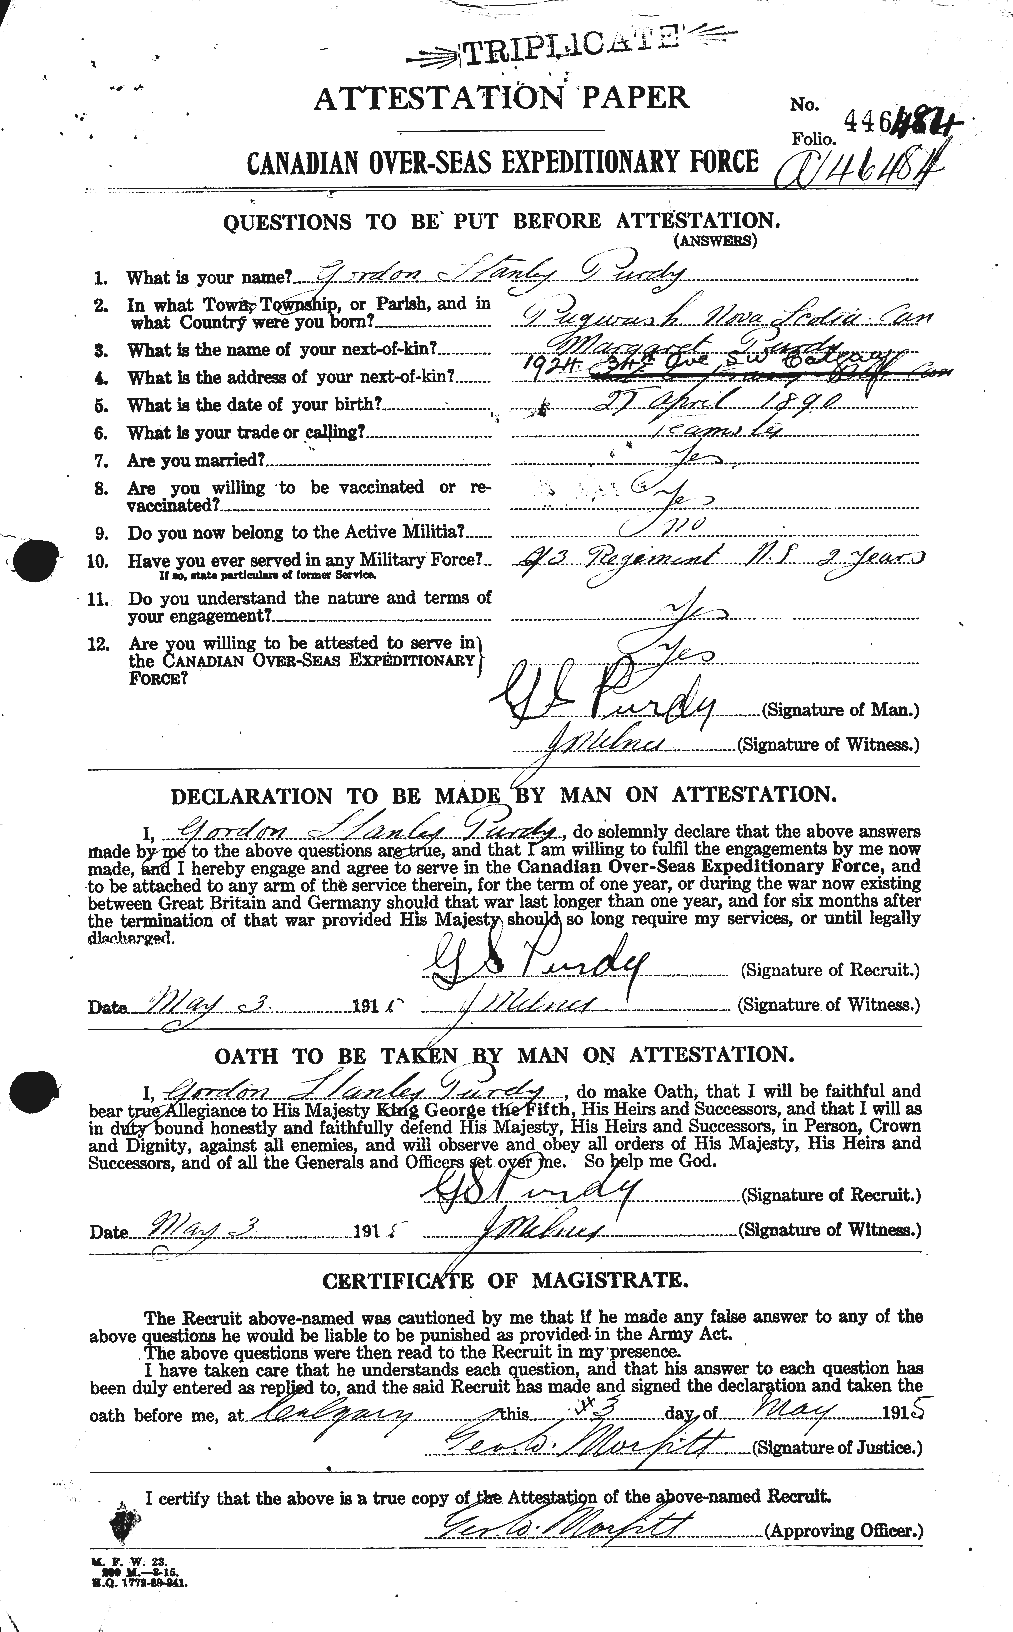 Personnel Records of the First World War - CEF 592319a